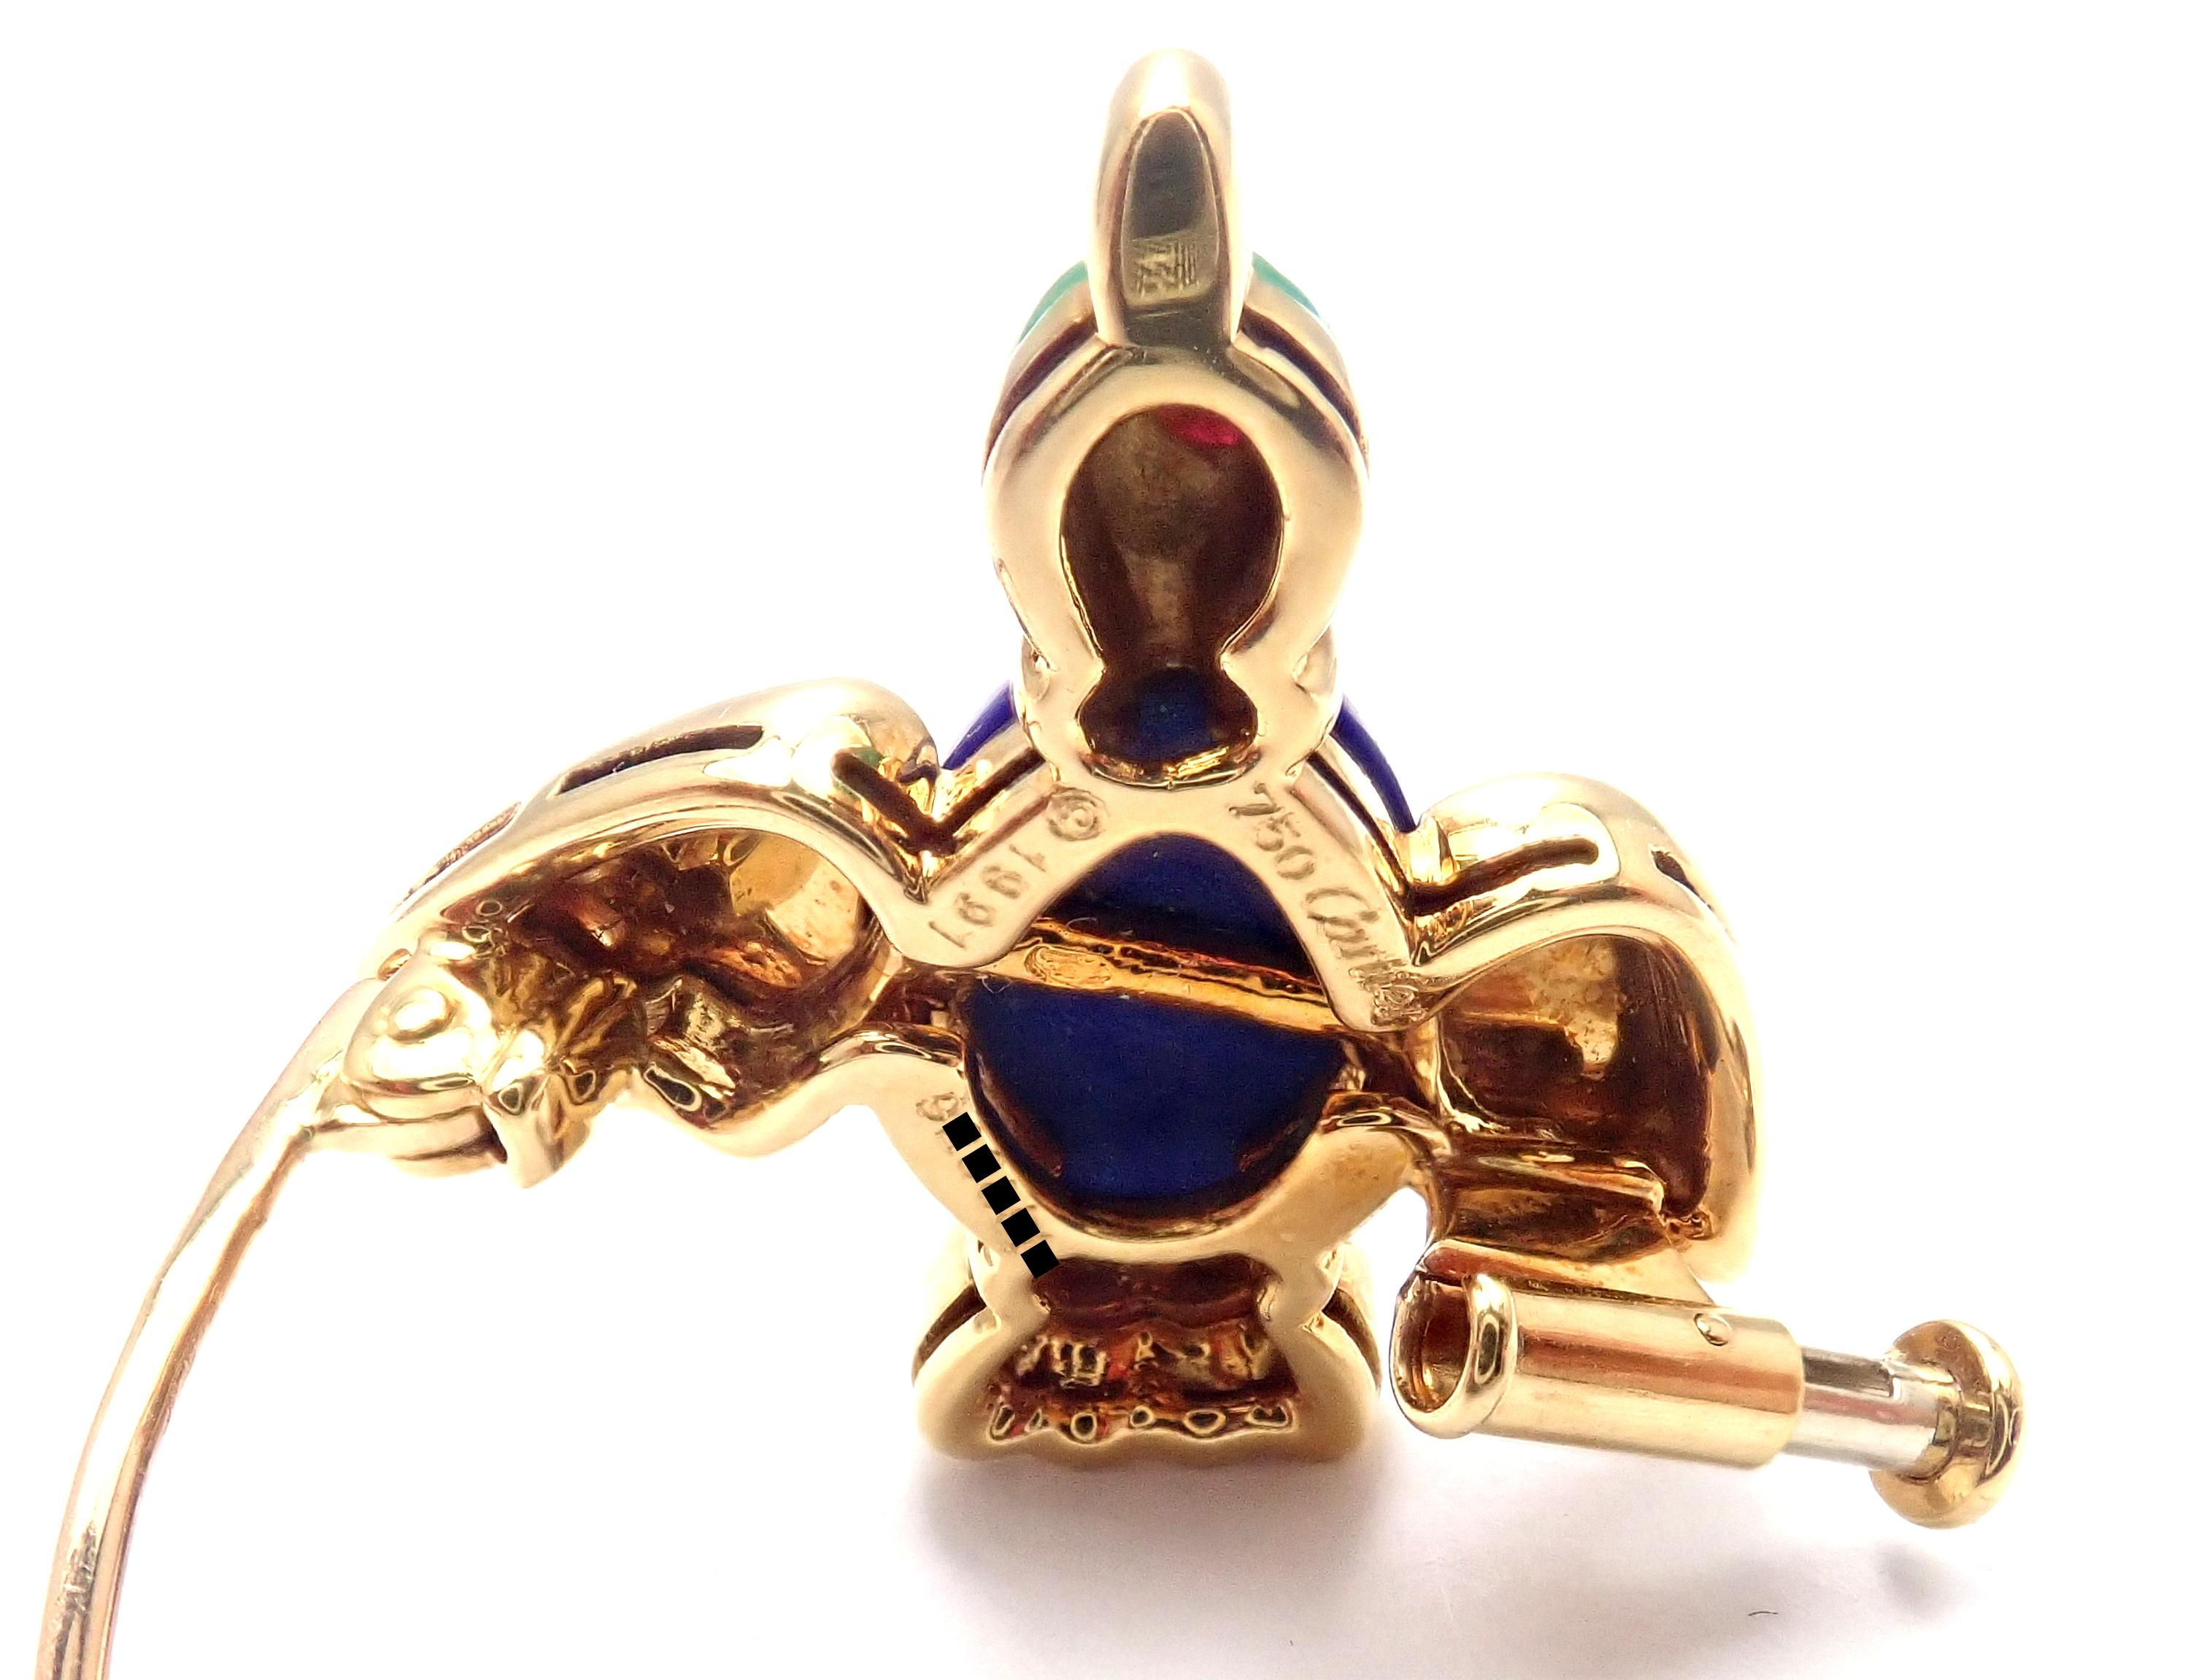 Vintage Cartier Lapis Lazuli Ruby Yellow Gold Bird Pin Brooch In Excellent Condition For Sale In Holland, PA